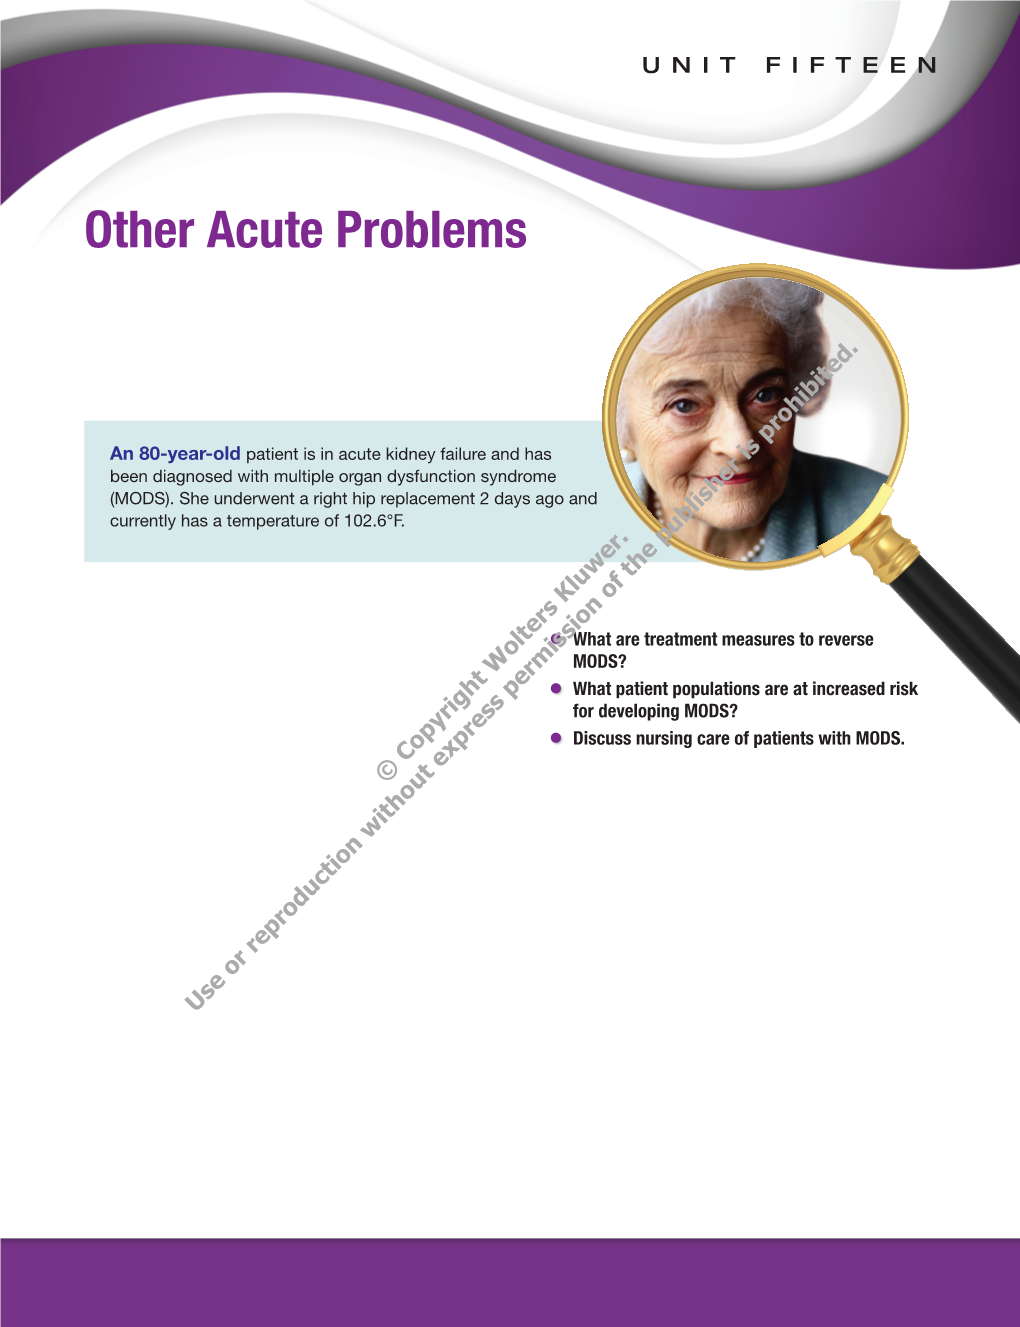 Other Acute Problems